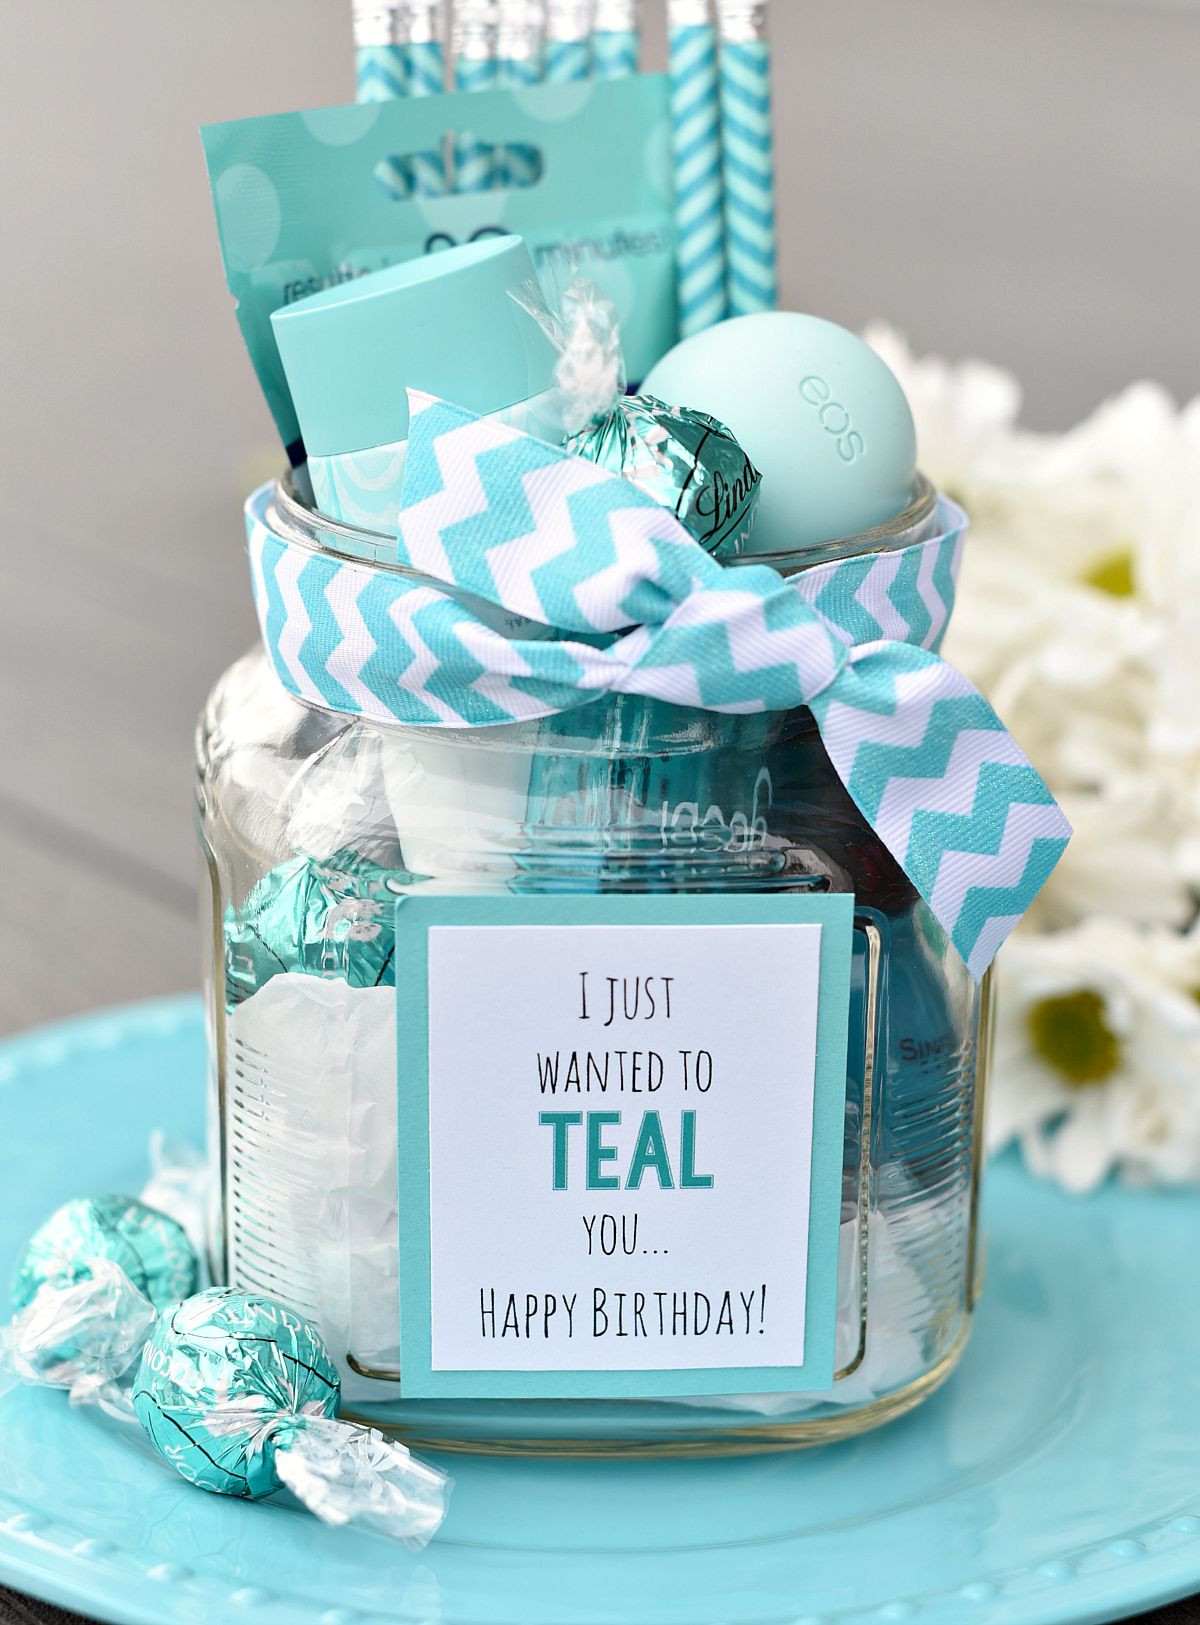 Cute Gift Basket Ideas For Friends
 Teal Birthday Gift Idea for Friends